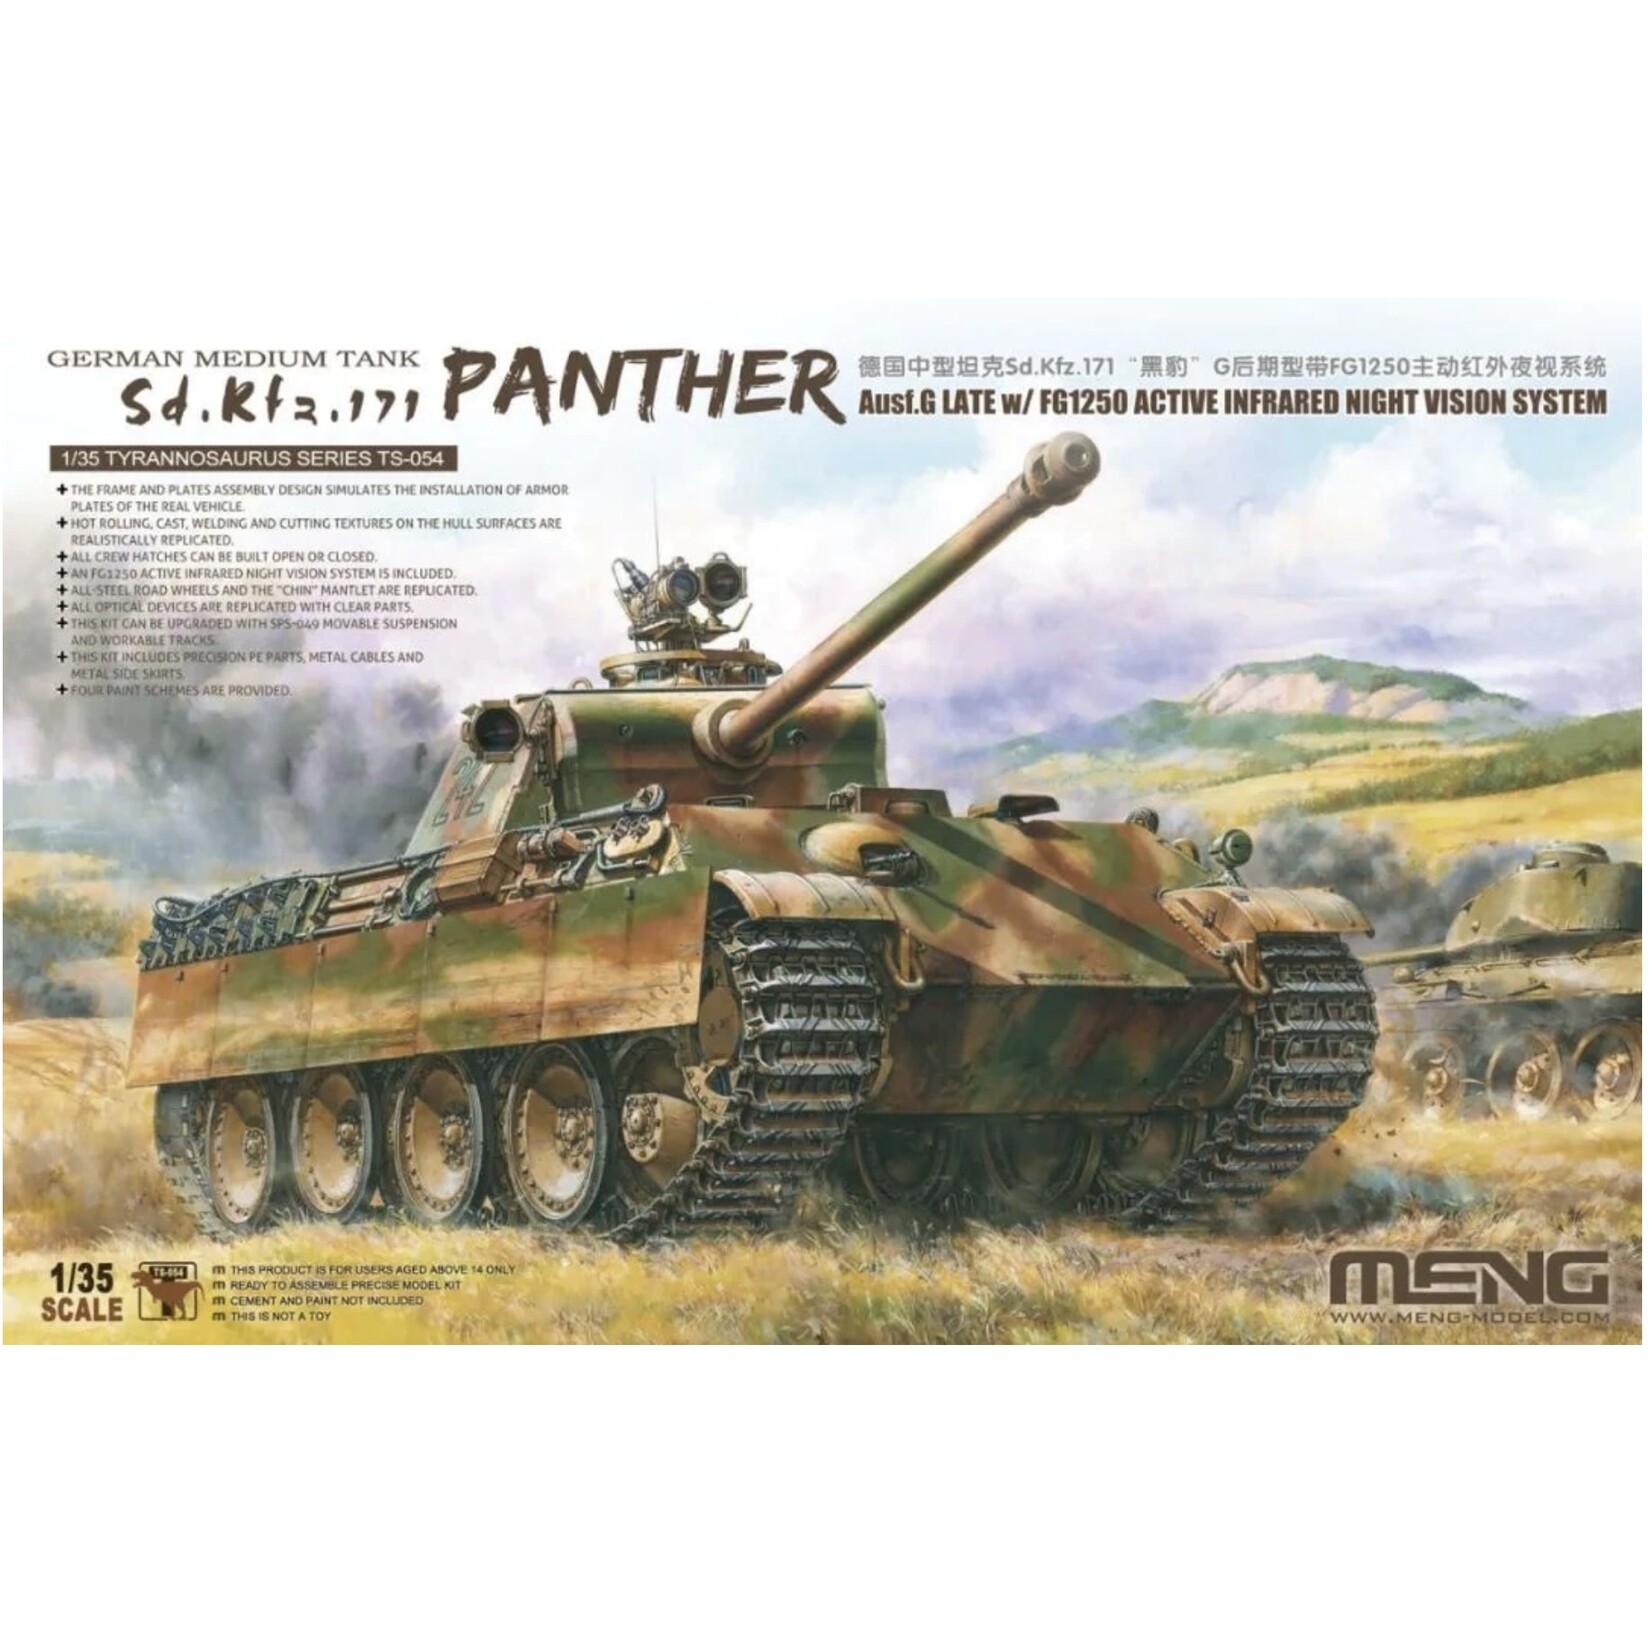 MENG MENGTS054 Sd.Kfz.171 Panher Ausf.G late with FG1250 Night Vission (1/35)